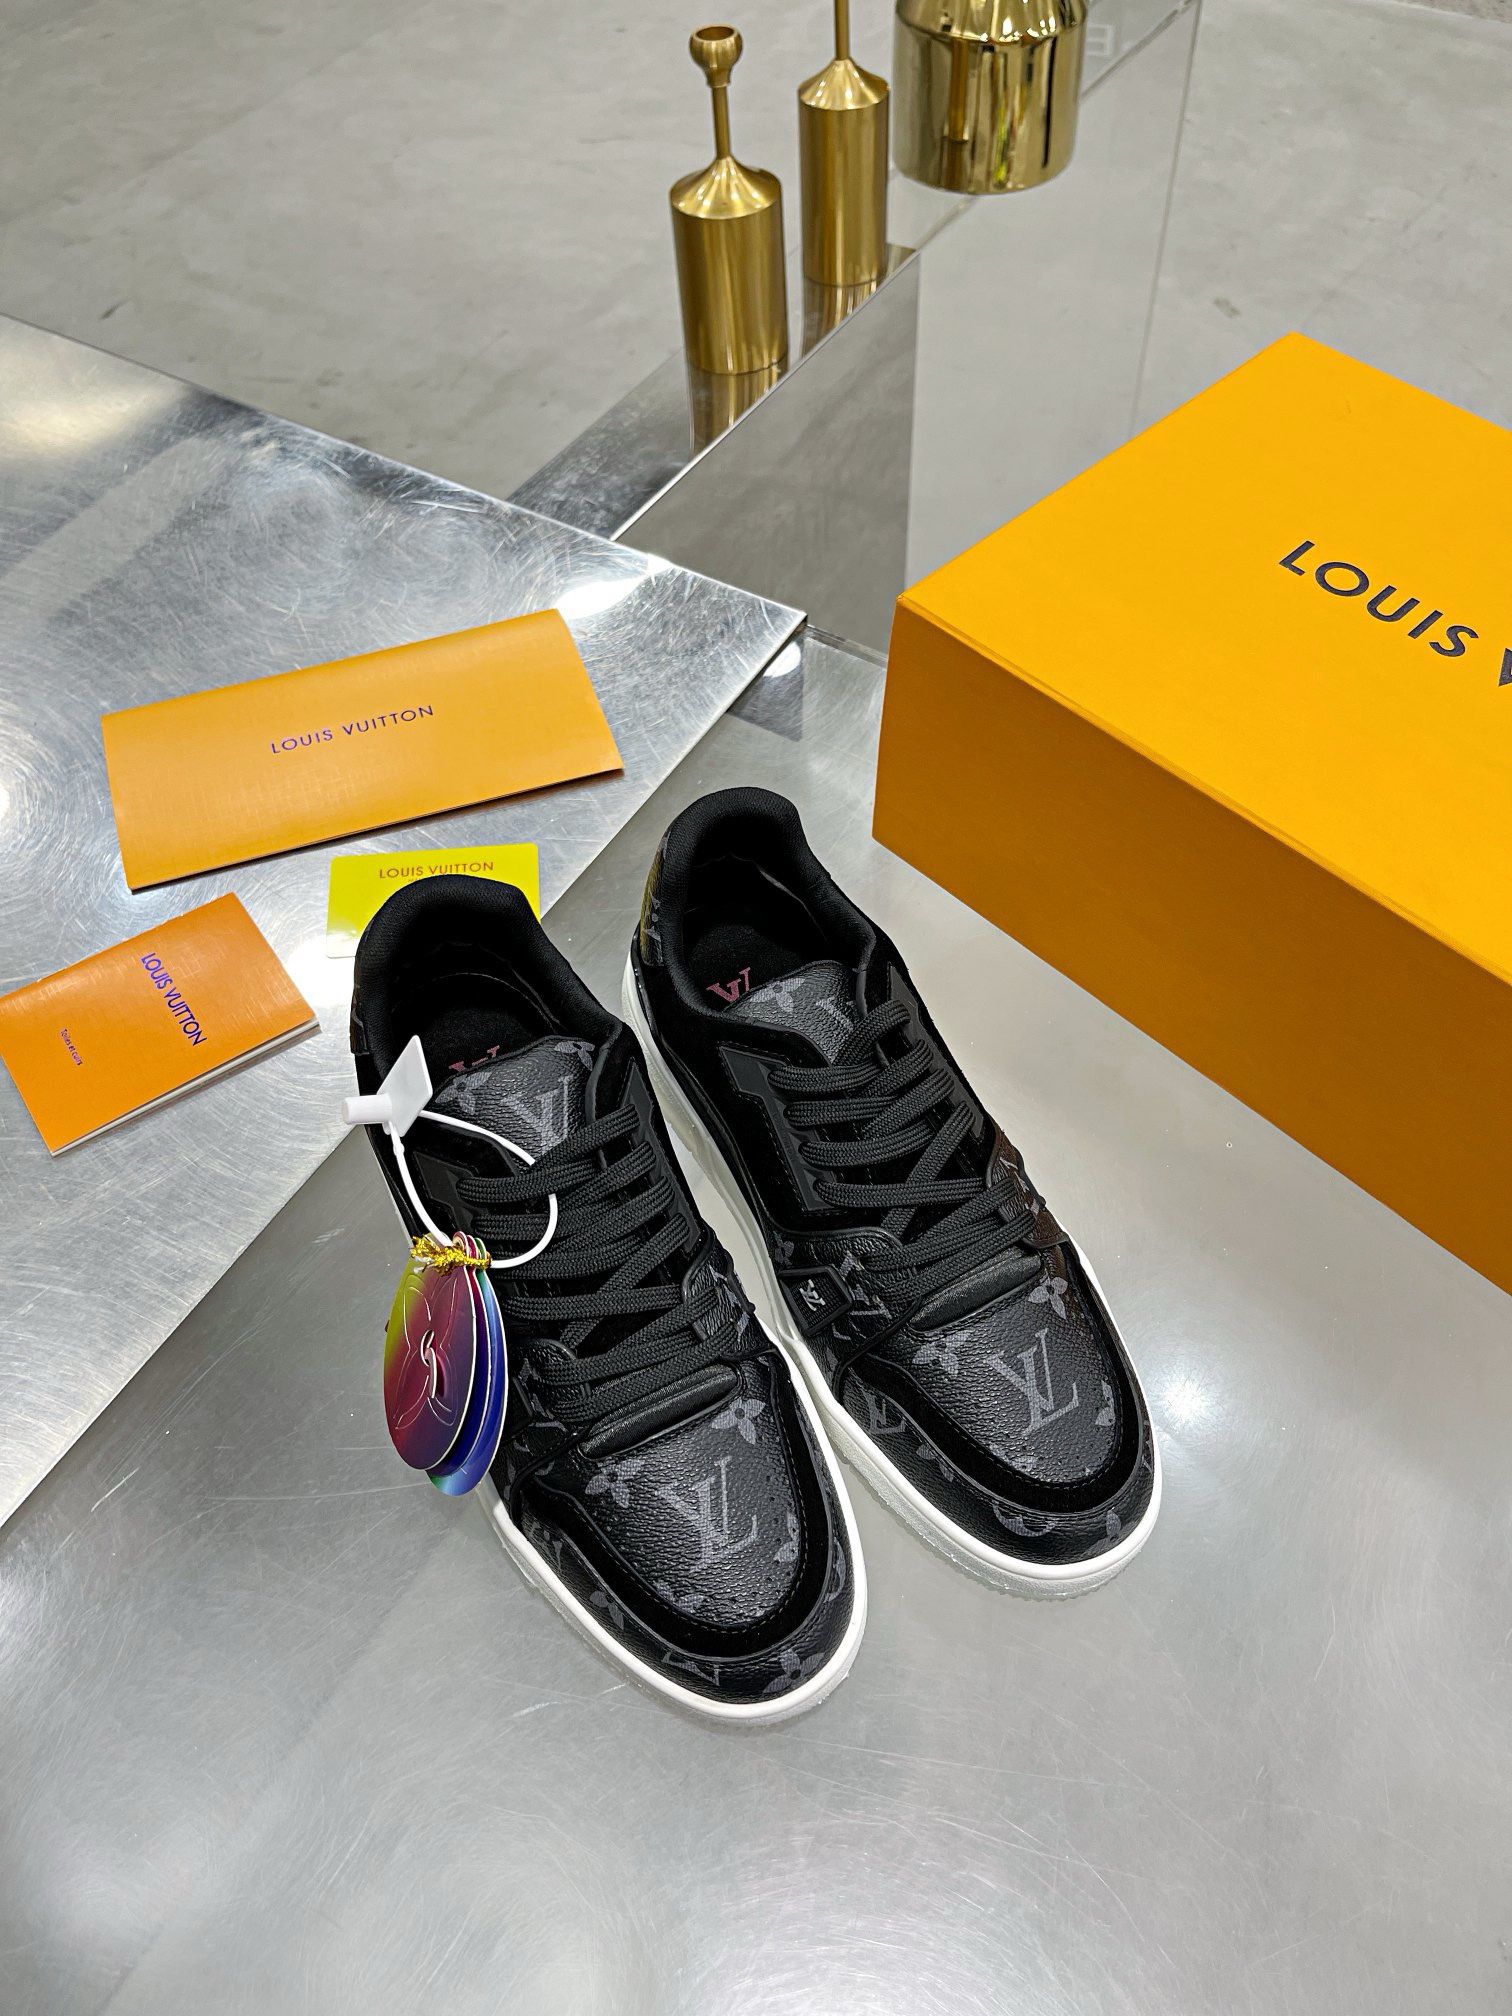 New Louis Vuitton Sneakers